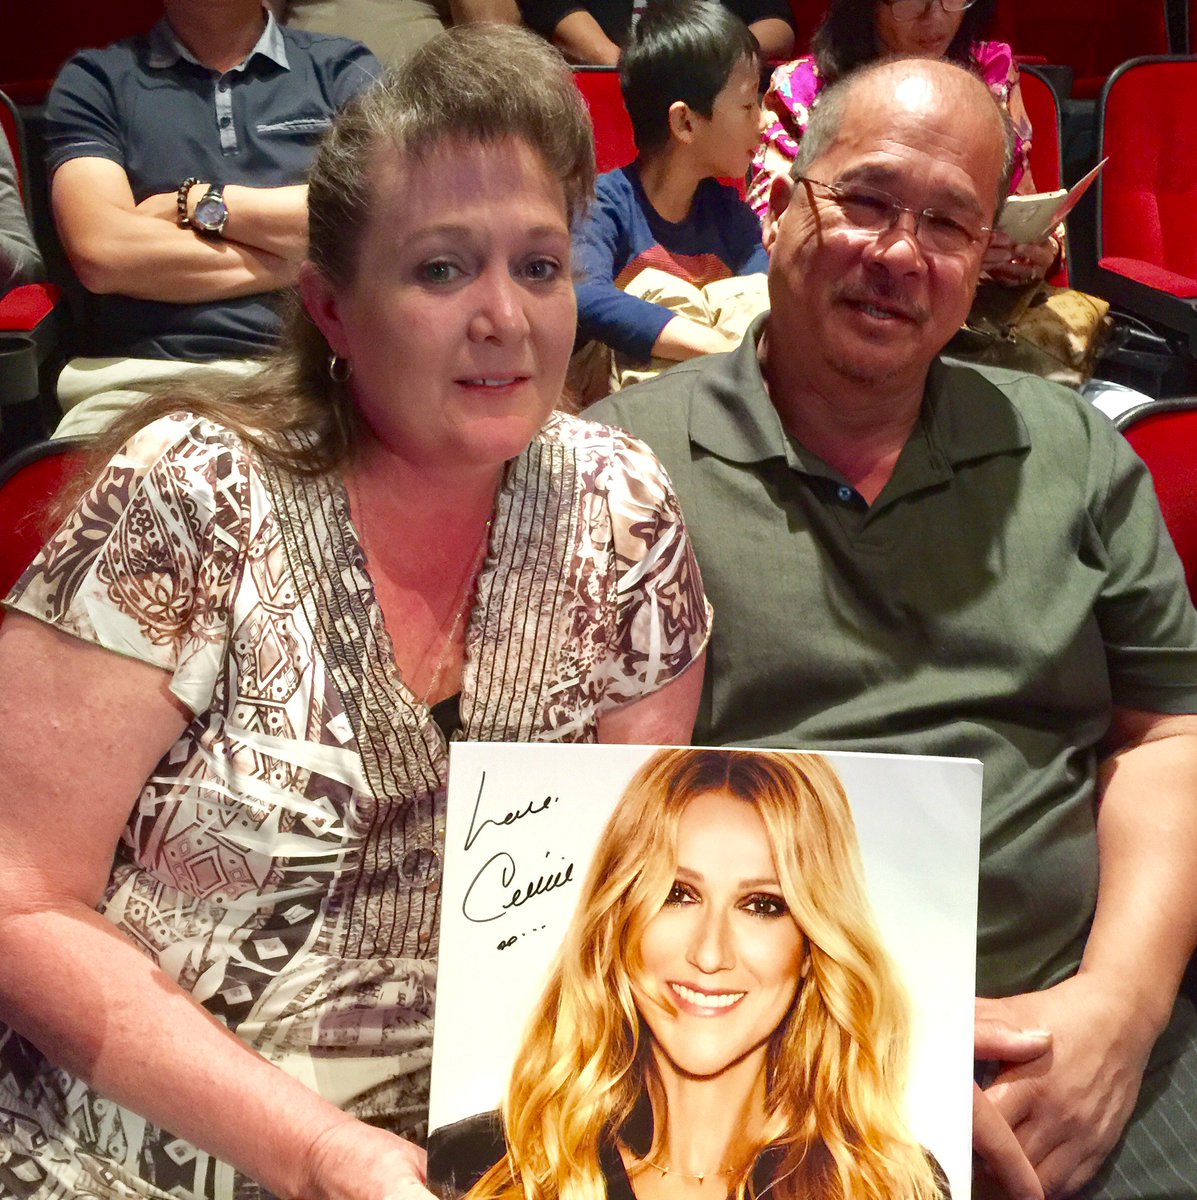 Tonight's winners are Trish and her husband Chico. Happy birthday to you Chico ;-) - TC #celinedionvegas https://t.co/sfe1qpitQo